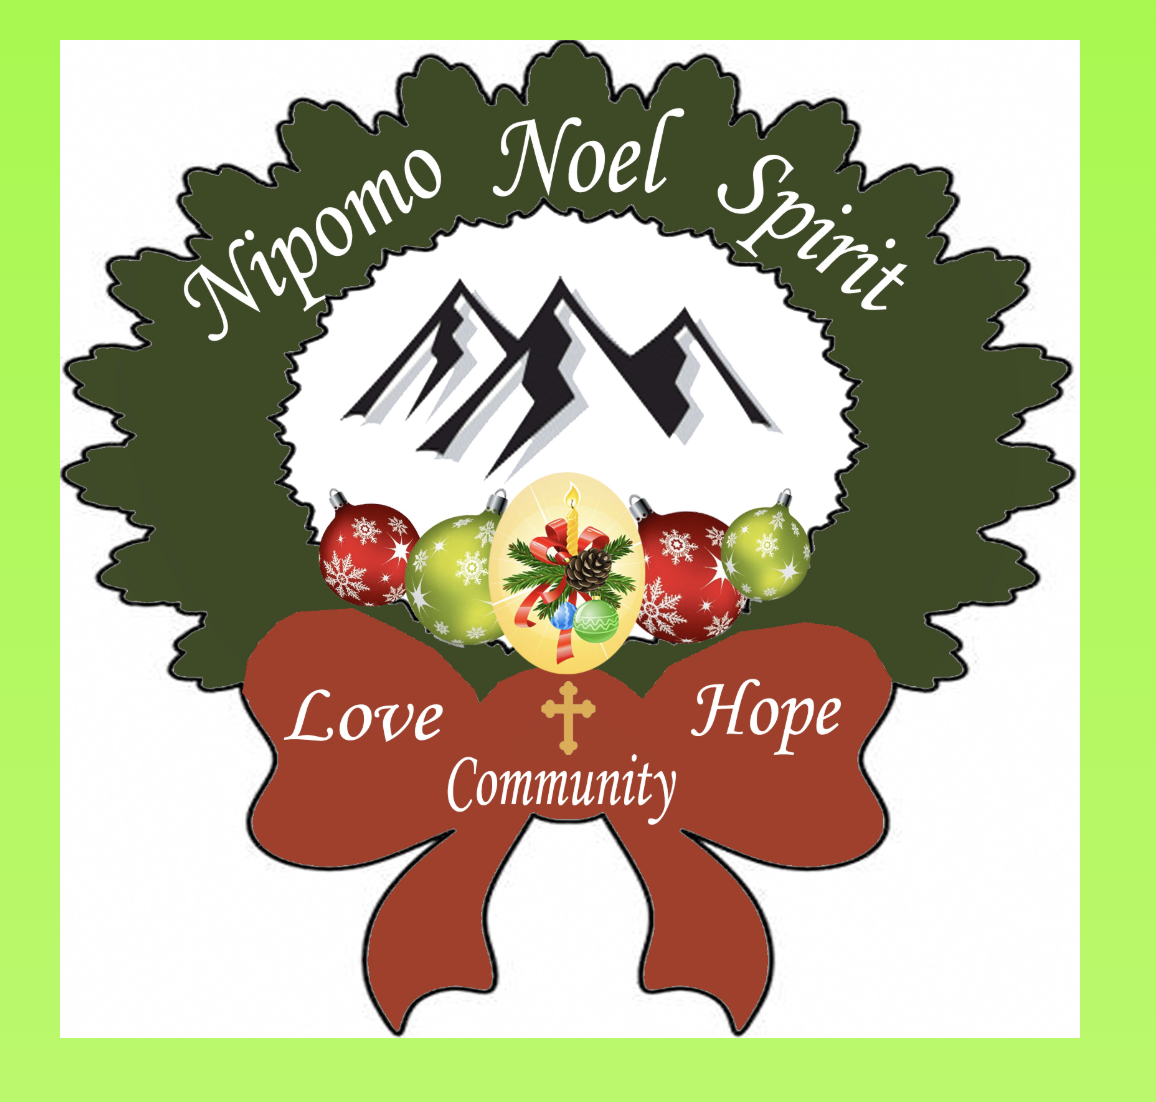 Nipomo organizations continue to seek community support to give